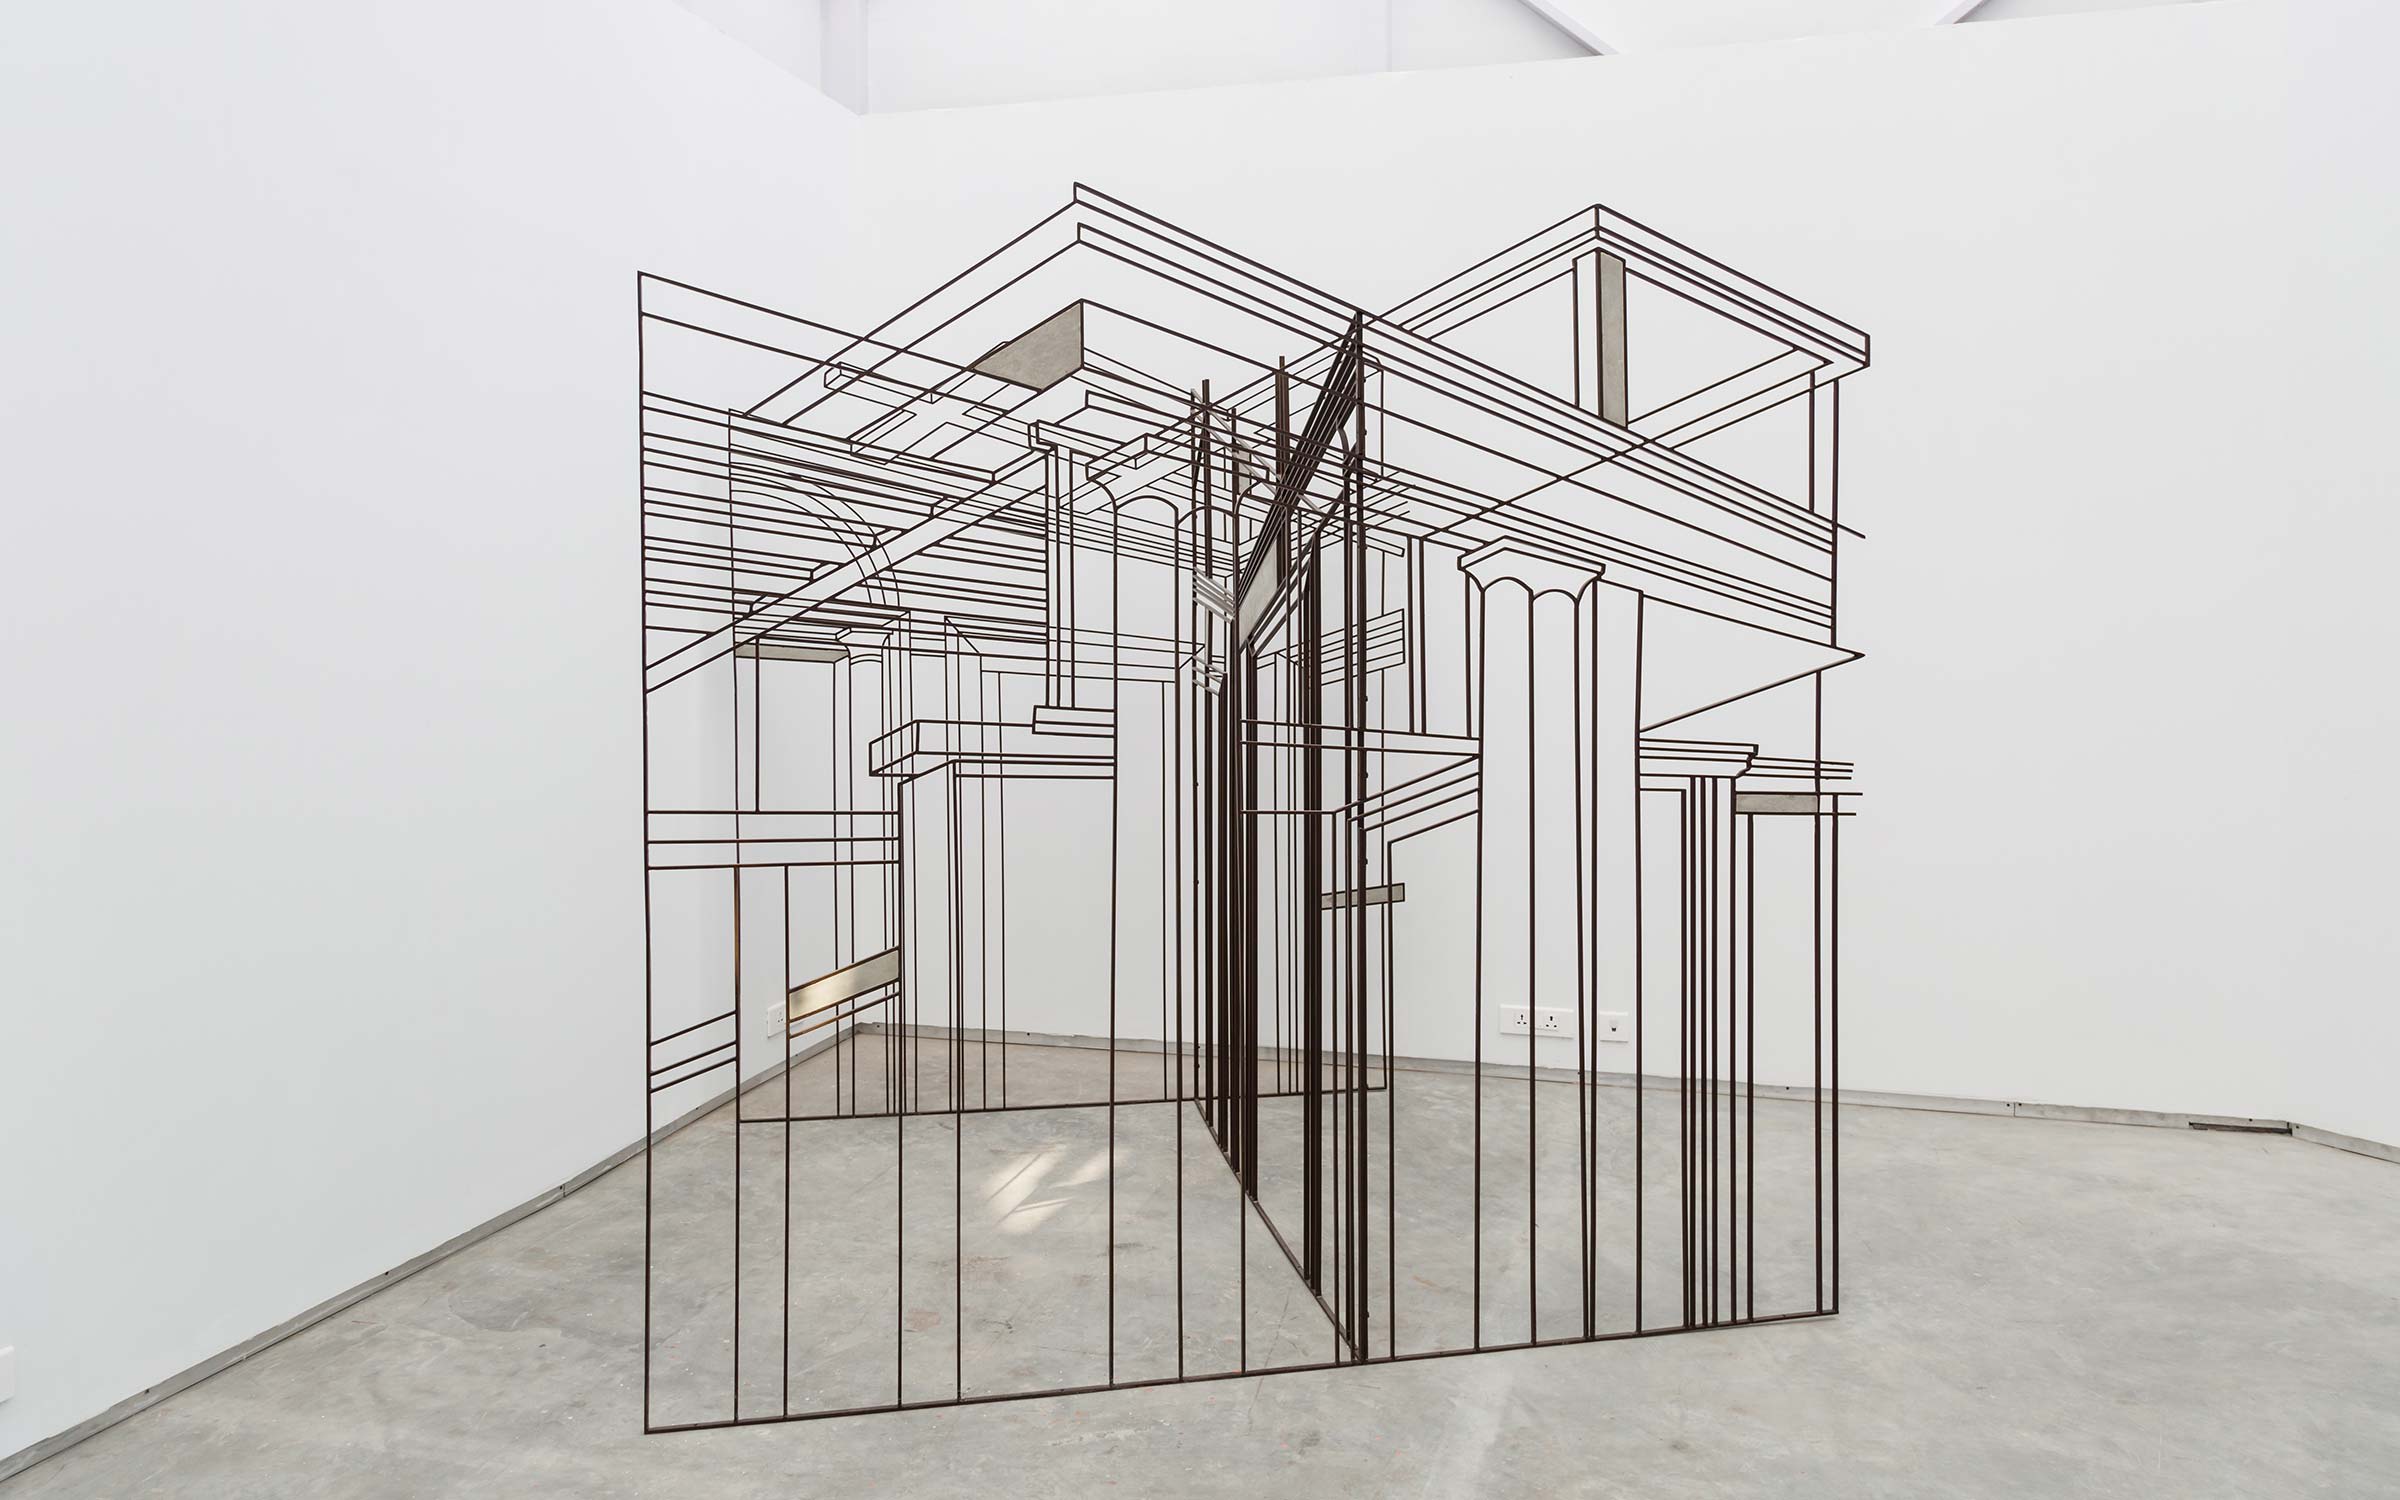 Rathin Barman, Recontextualised Architectural Spaces 1, 2 & 3, 2018, Welded steel, GFRC board & paint, 98 x 73, courtesy Experimenter